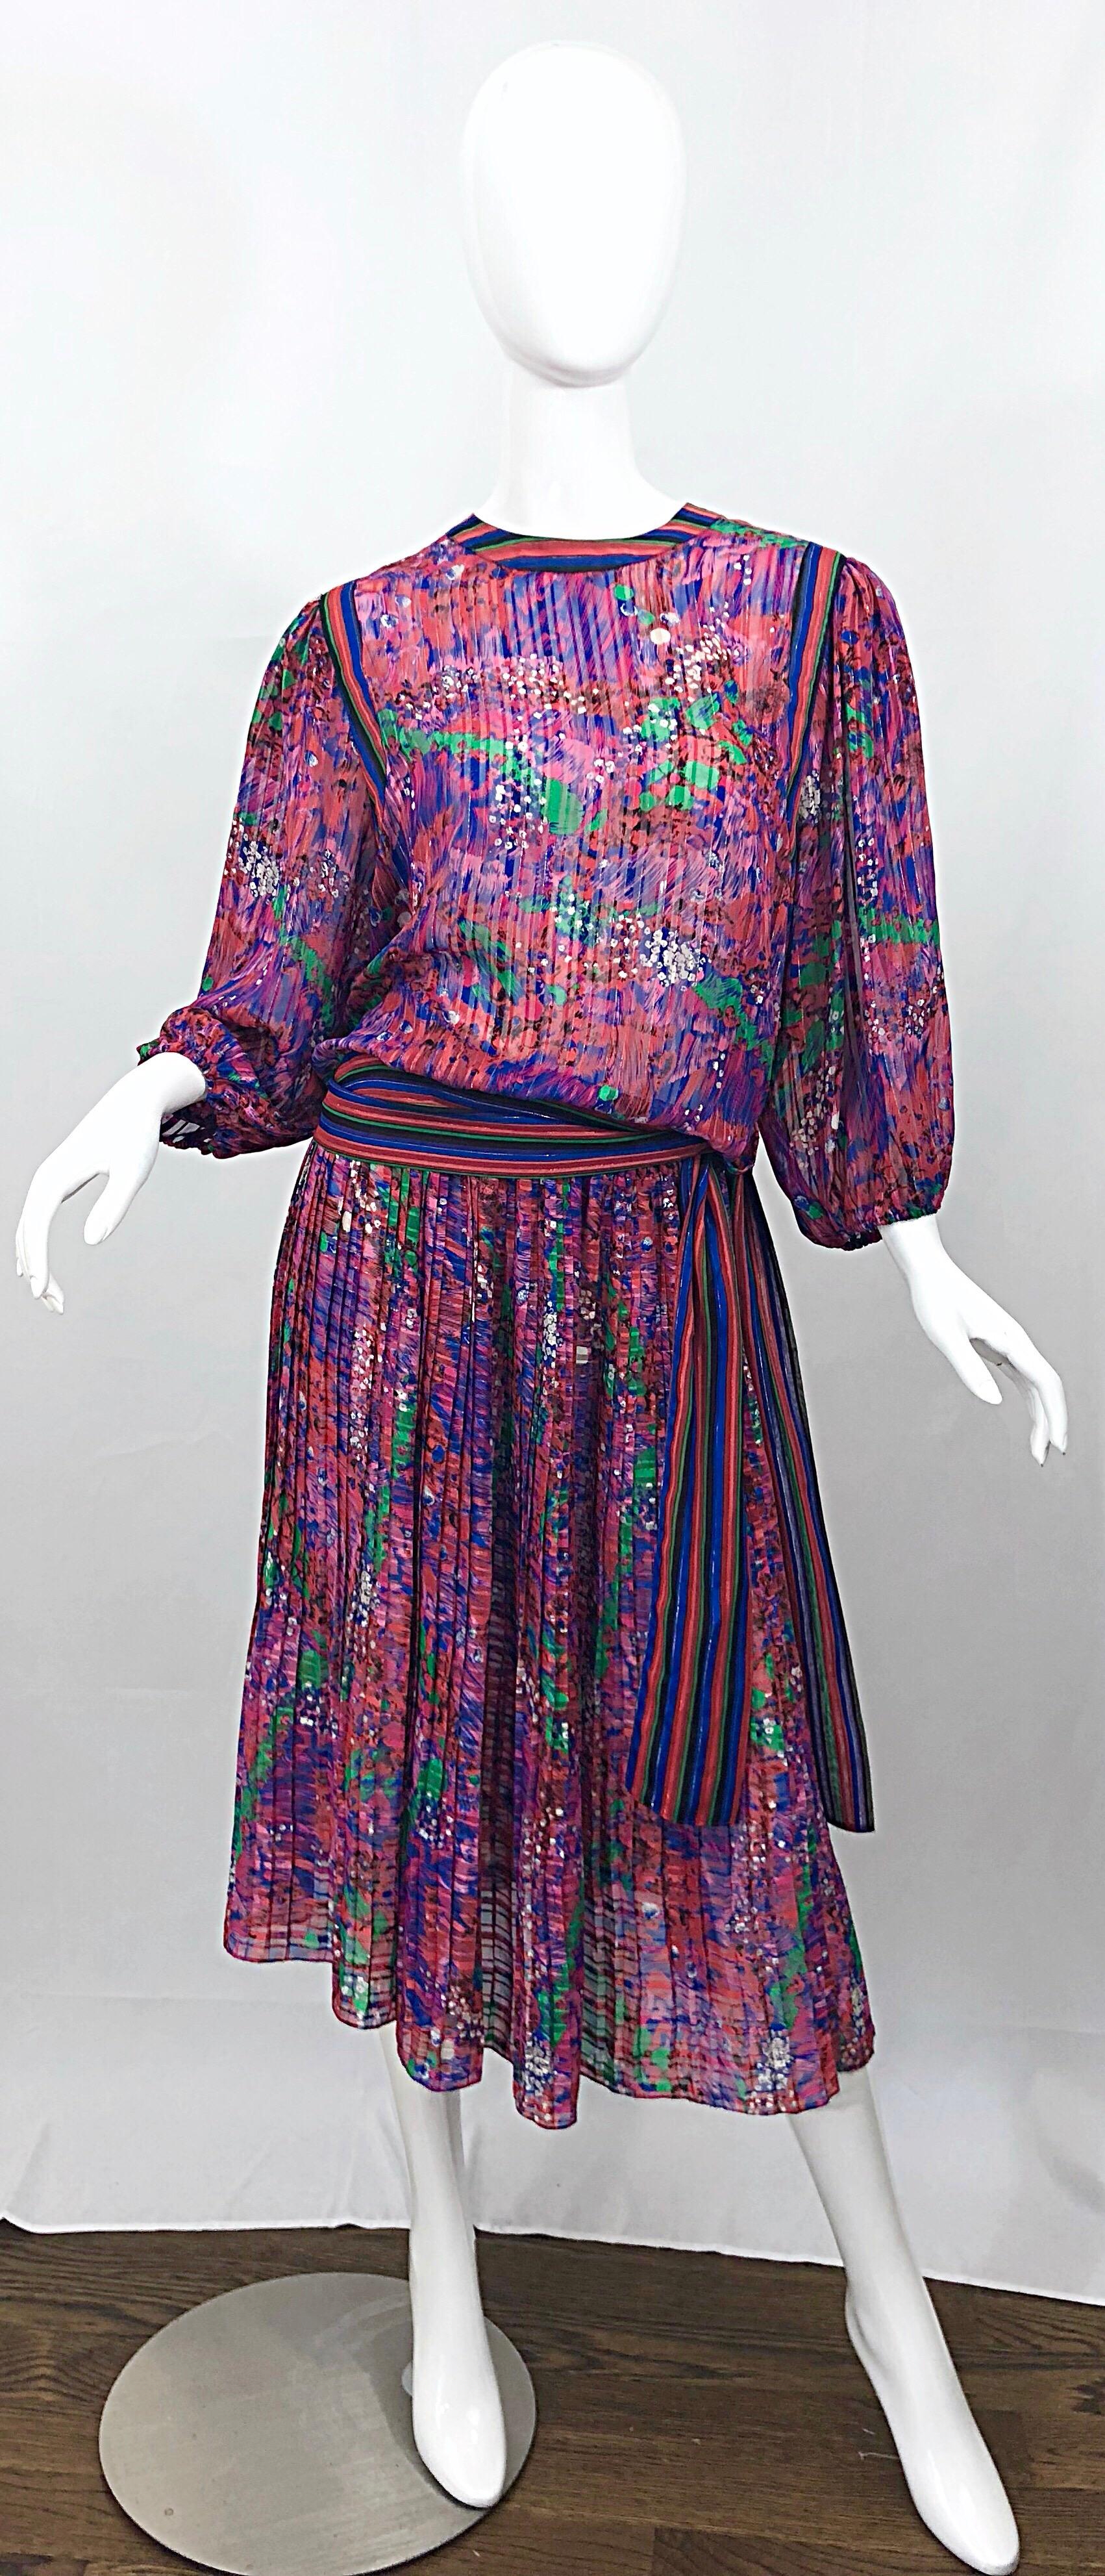 Fabulous vintage 80s DIANE FREIS flowers and stripes two piece boho dress ensemble! Features vibrant colors of pink, purple, green and blue, with metallic threads throughout. Signature Diane Fres style that is easy and breezy. Blouse has two buttons